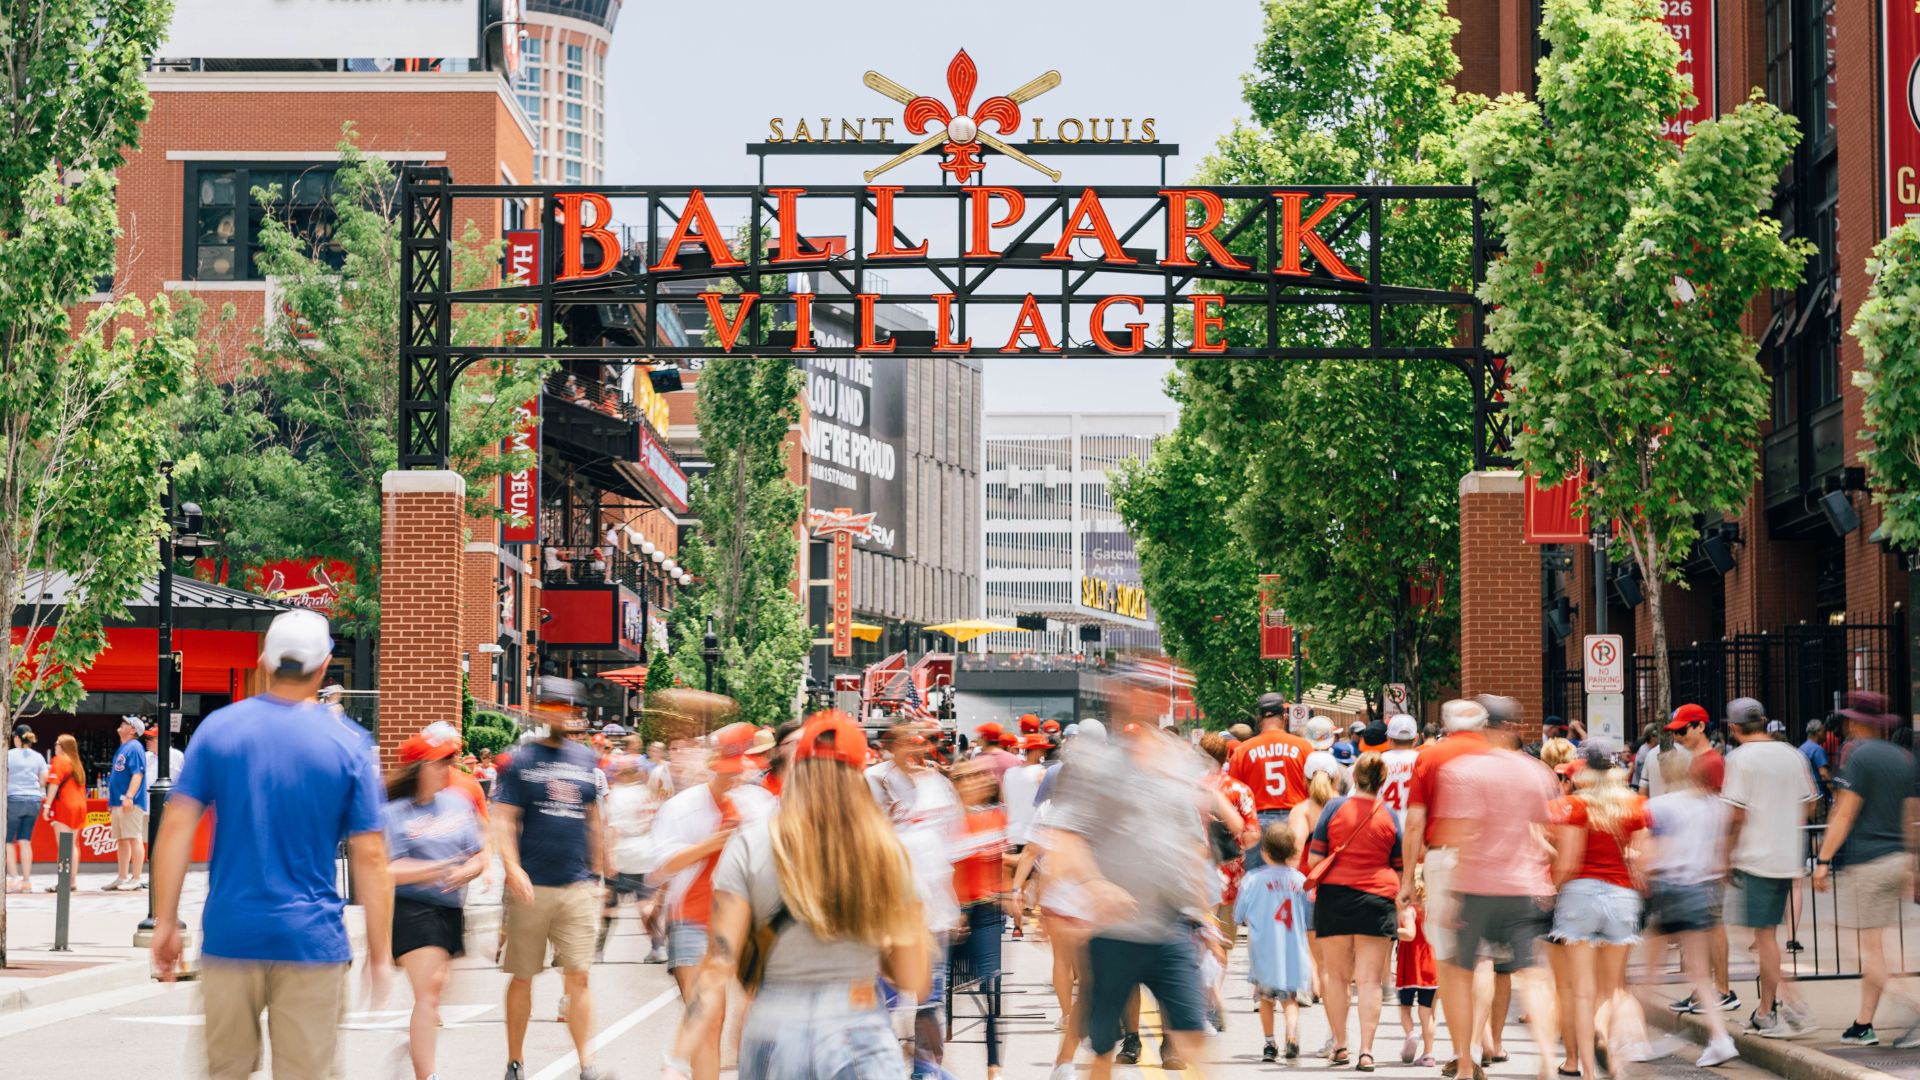 People mill about Ballpark Village in St. Louis.